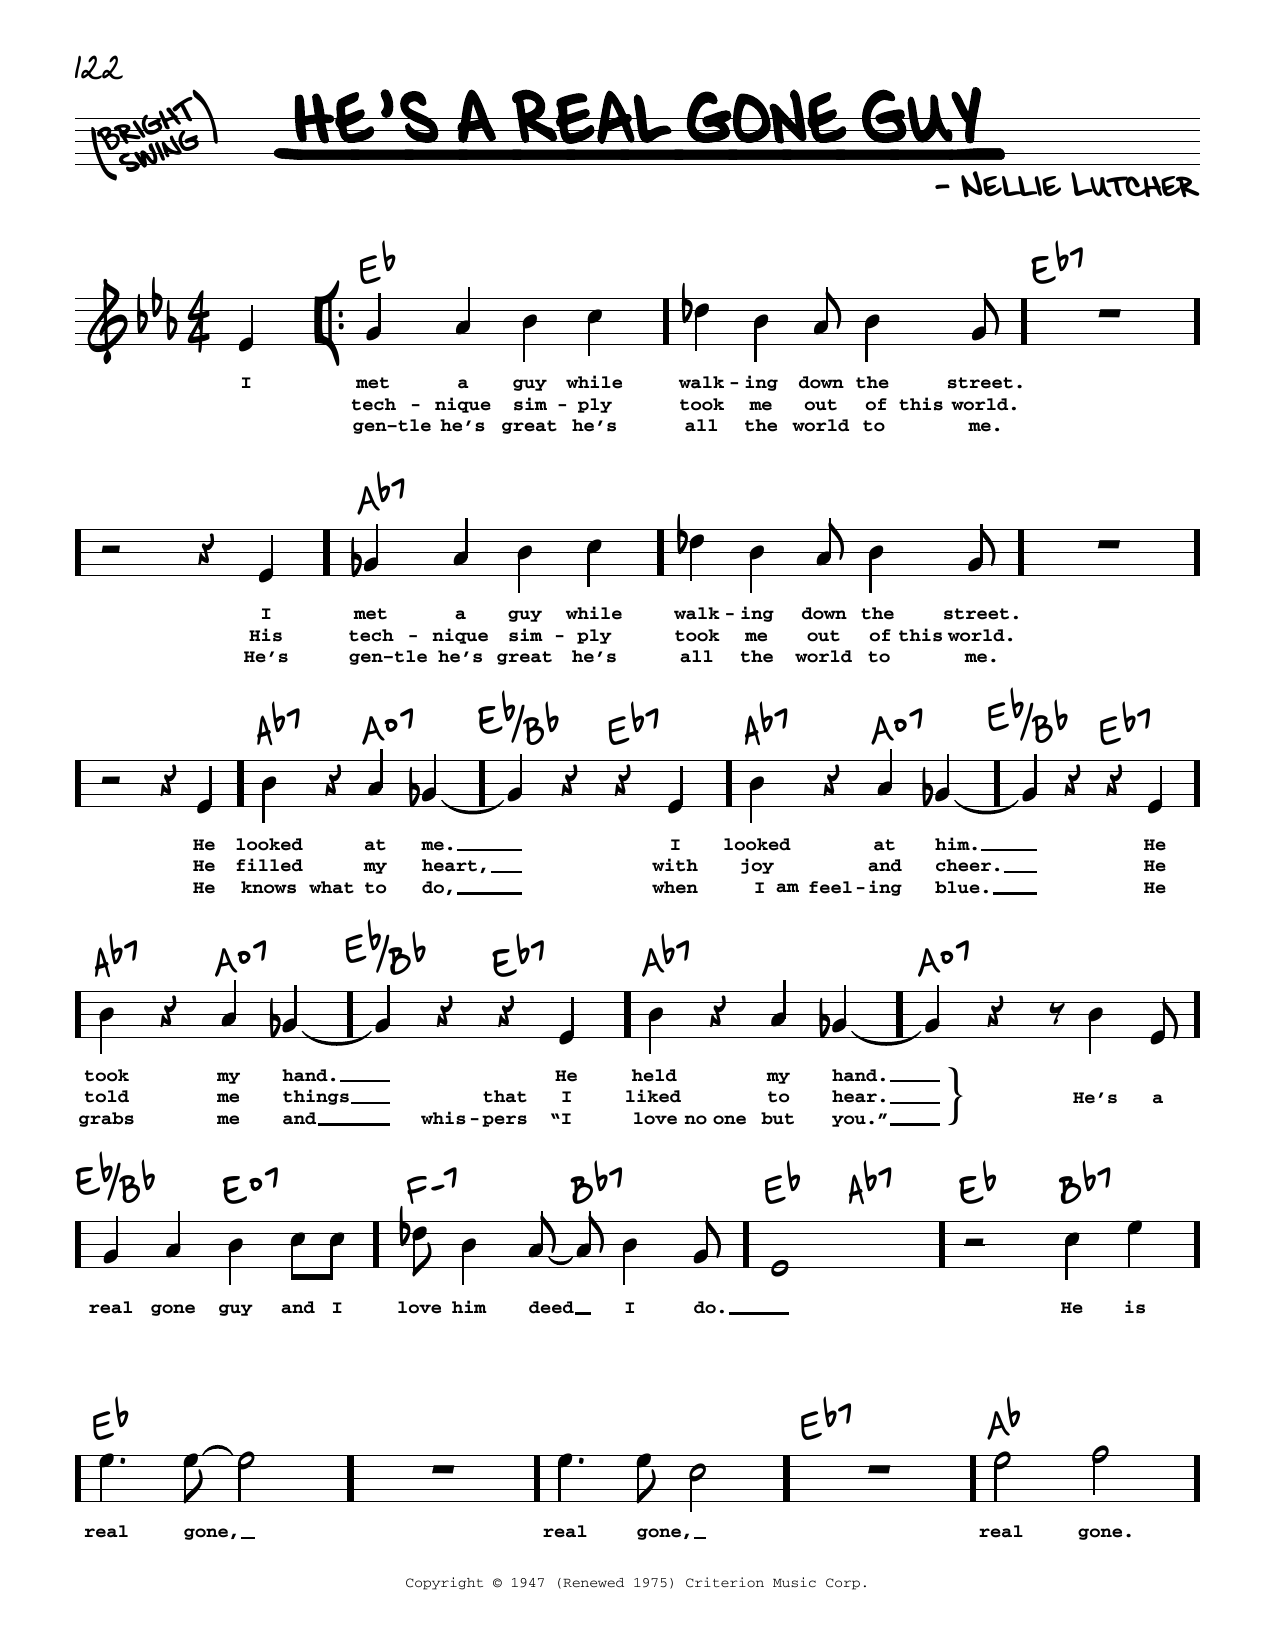 Download Nellie Lutcher He's A Real Gone Guy (High Voice) Sheet Music